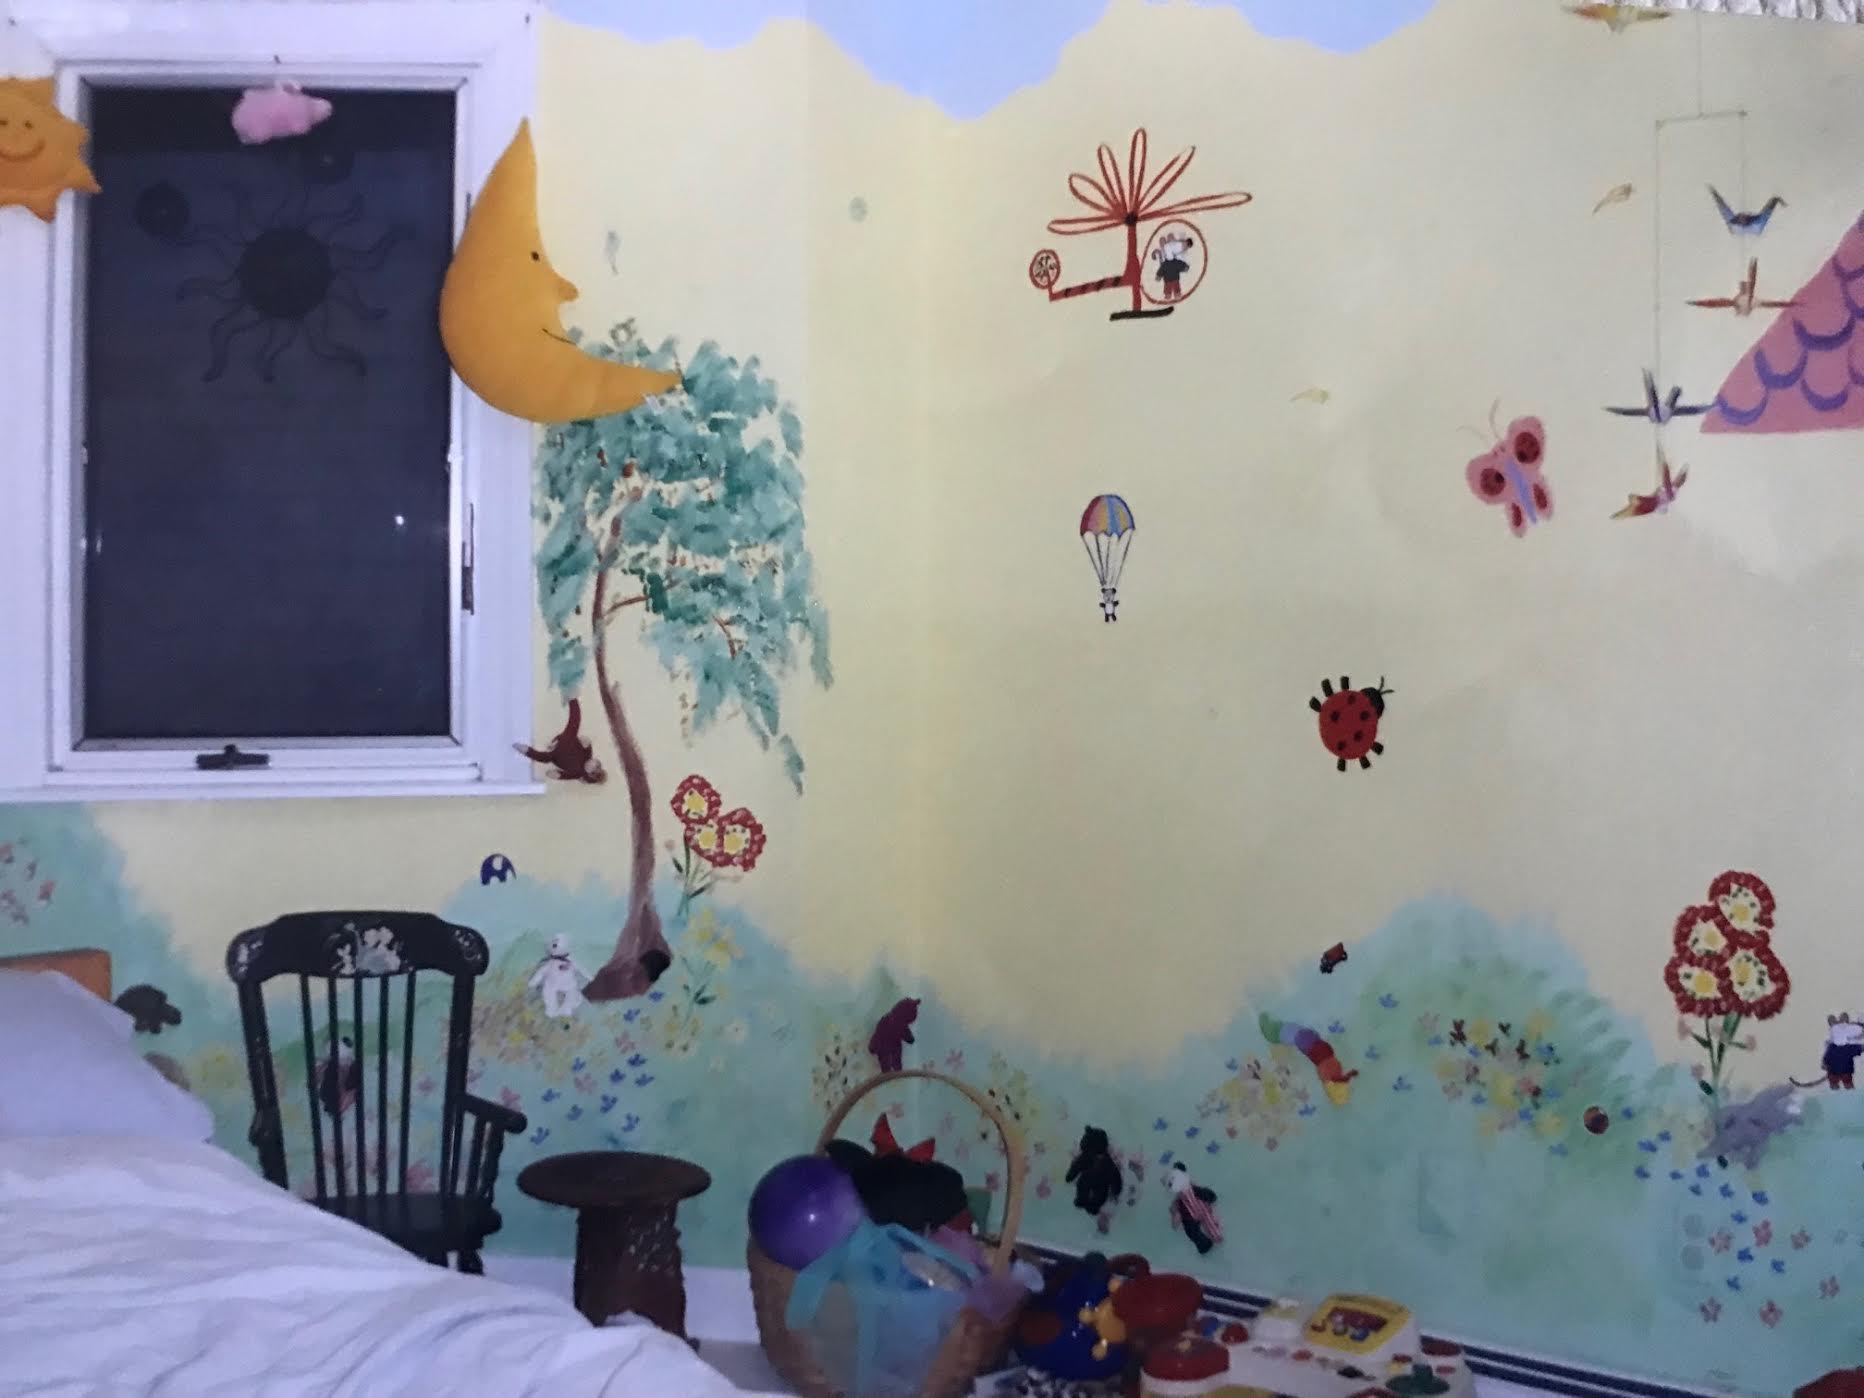 Focus on play in a child's bedroom